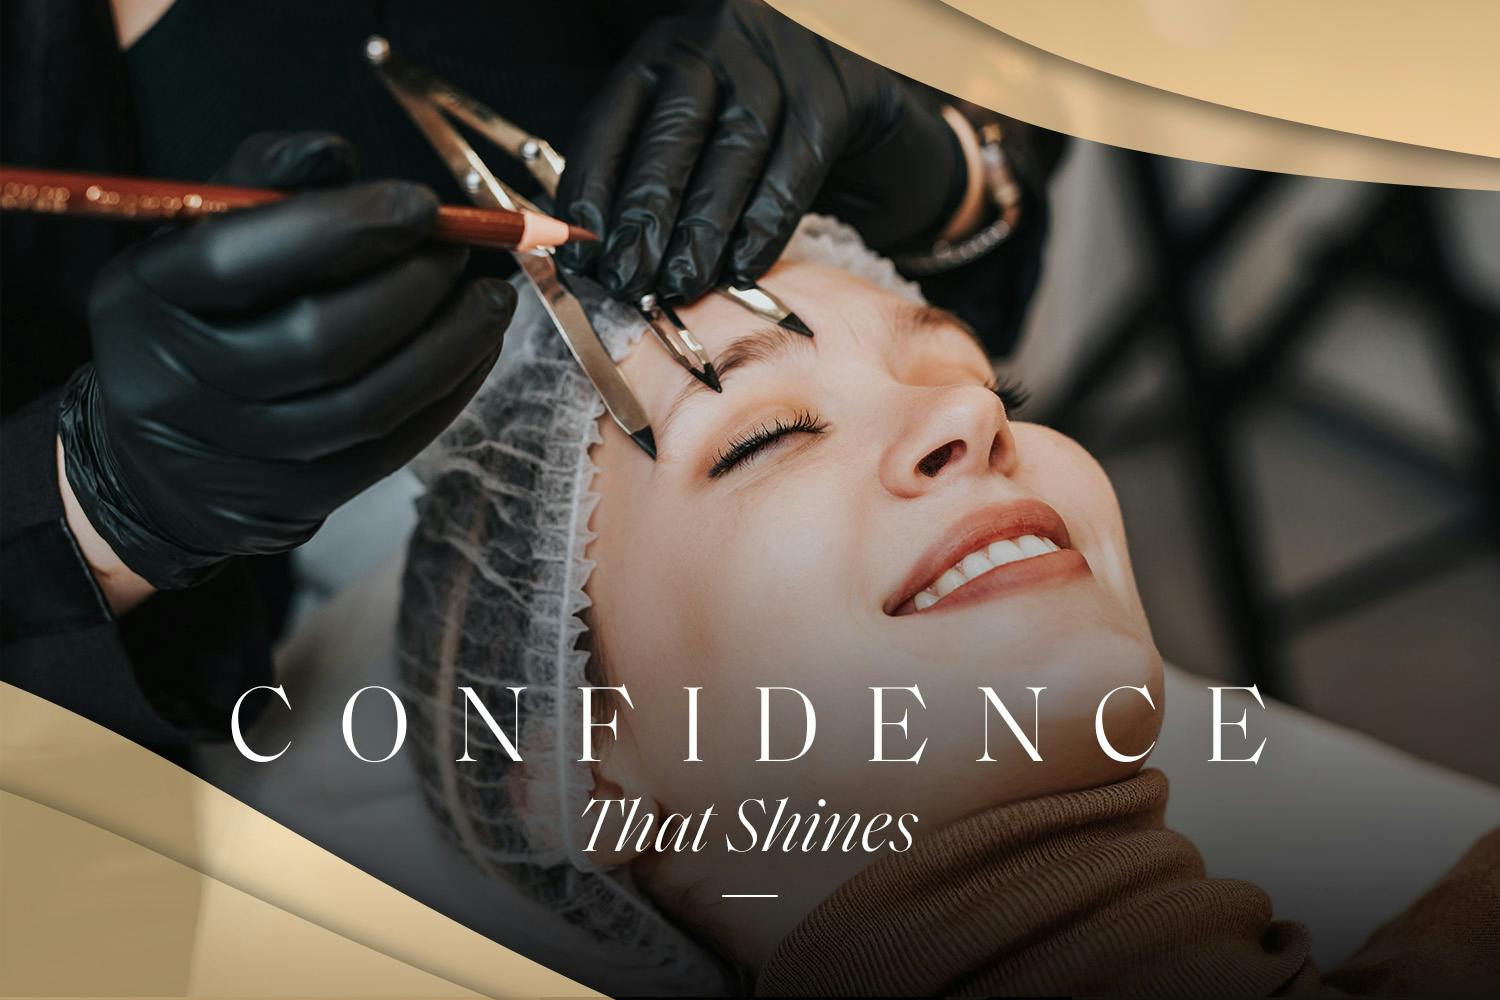 Confidence is beauty's best friend. When our students master a new technique or receive their certification, their self-esteem skyrockets